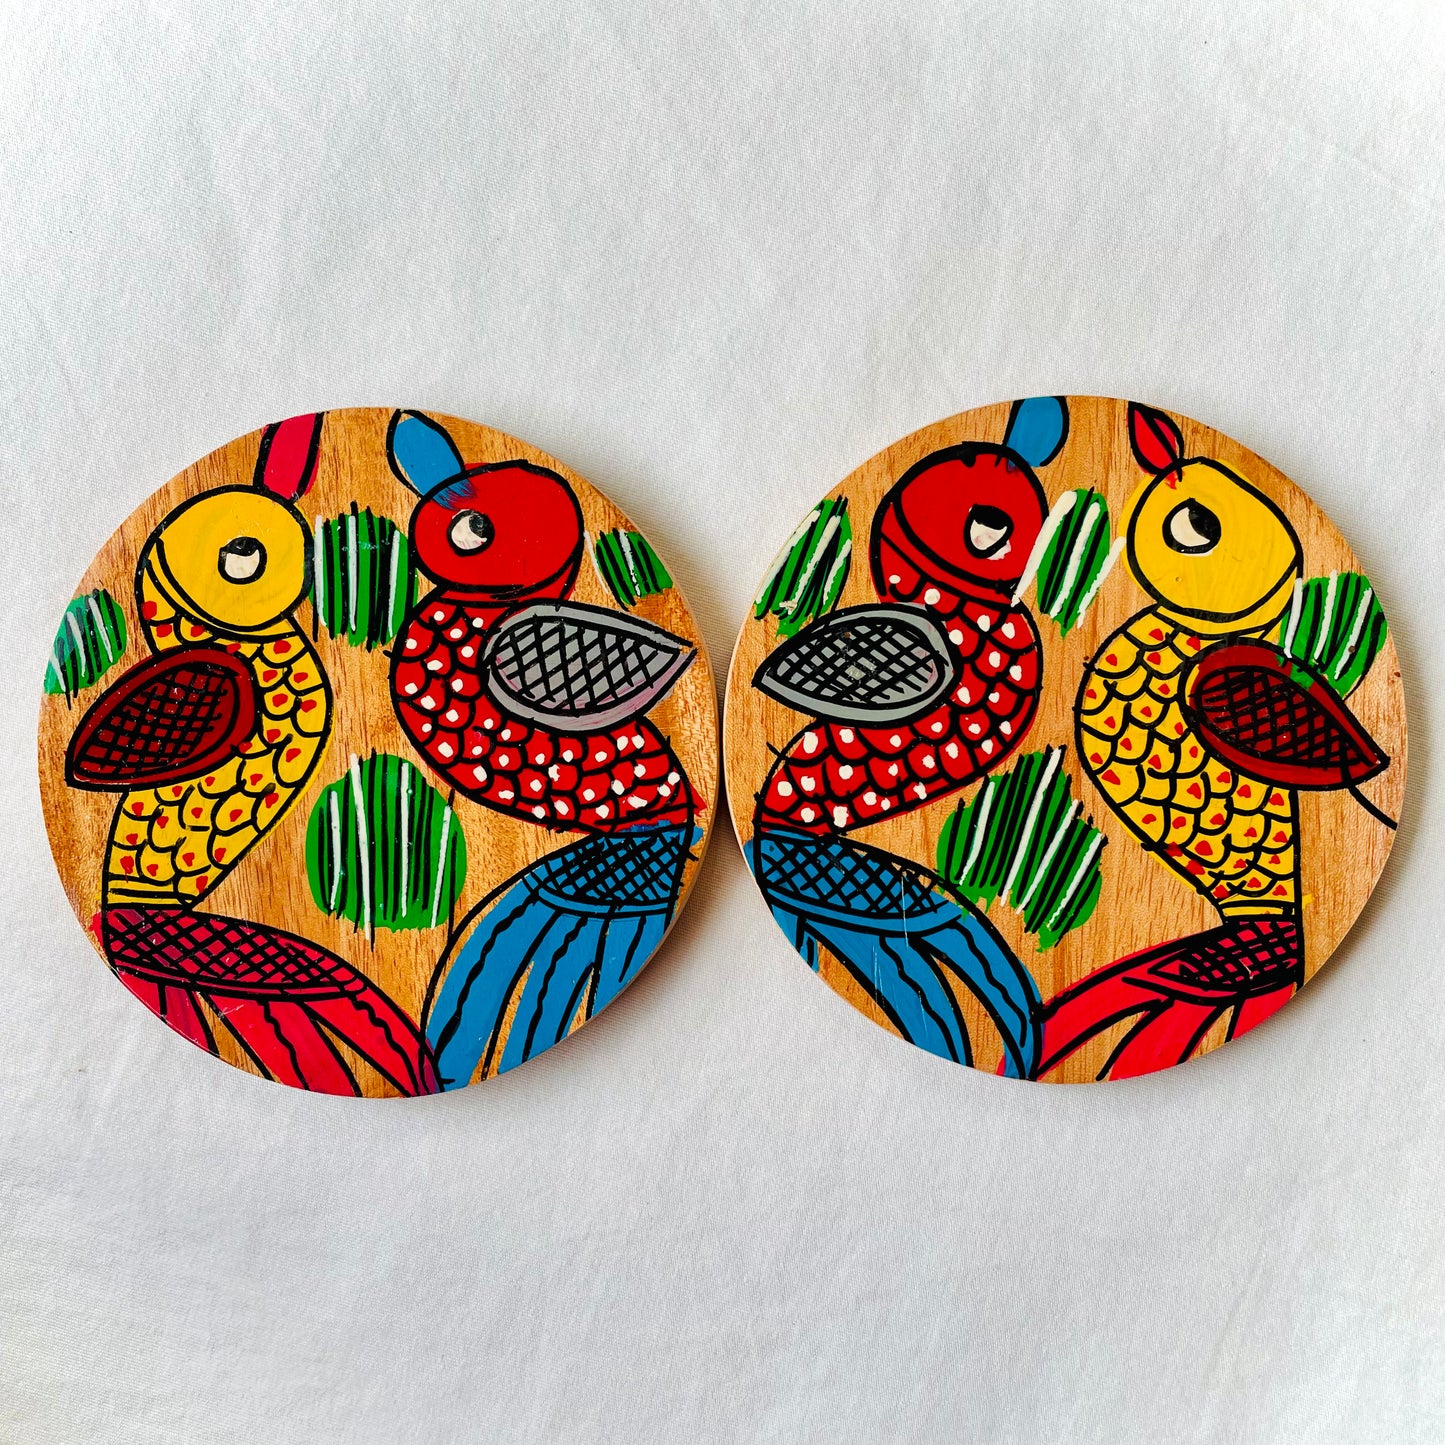 Two round wood coasters displayed against a white background, feature one yellow bird with red feathers and a beak and one red with blue feathers and a beak along with some leaves in each wood coaster